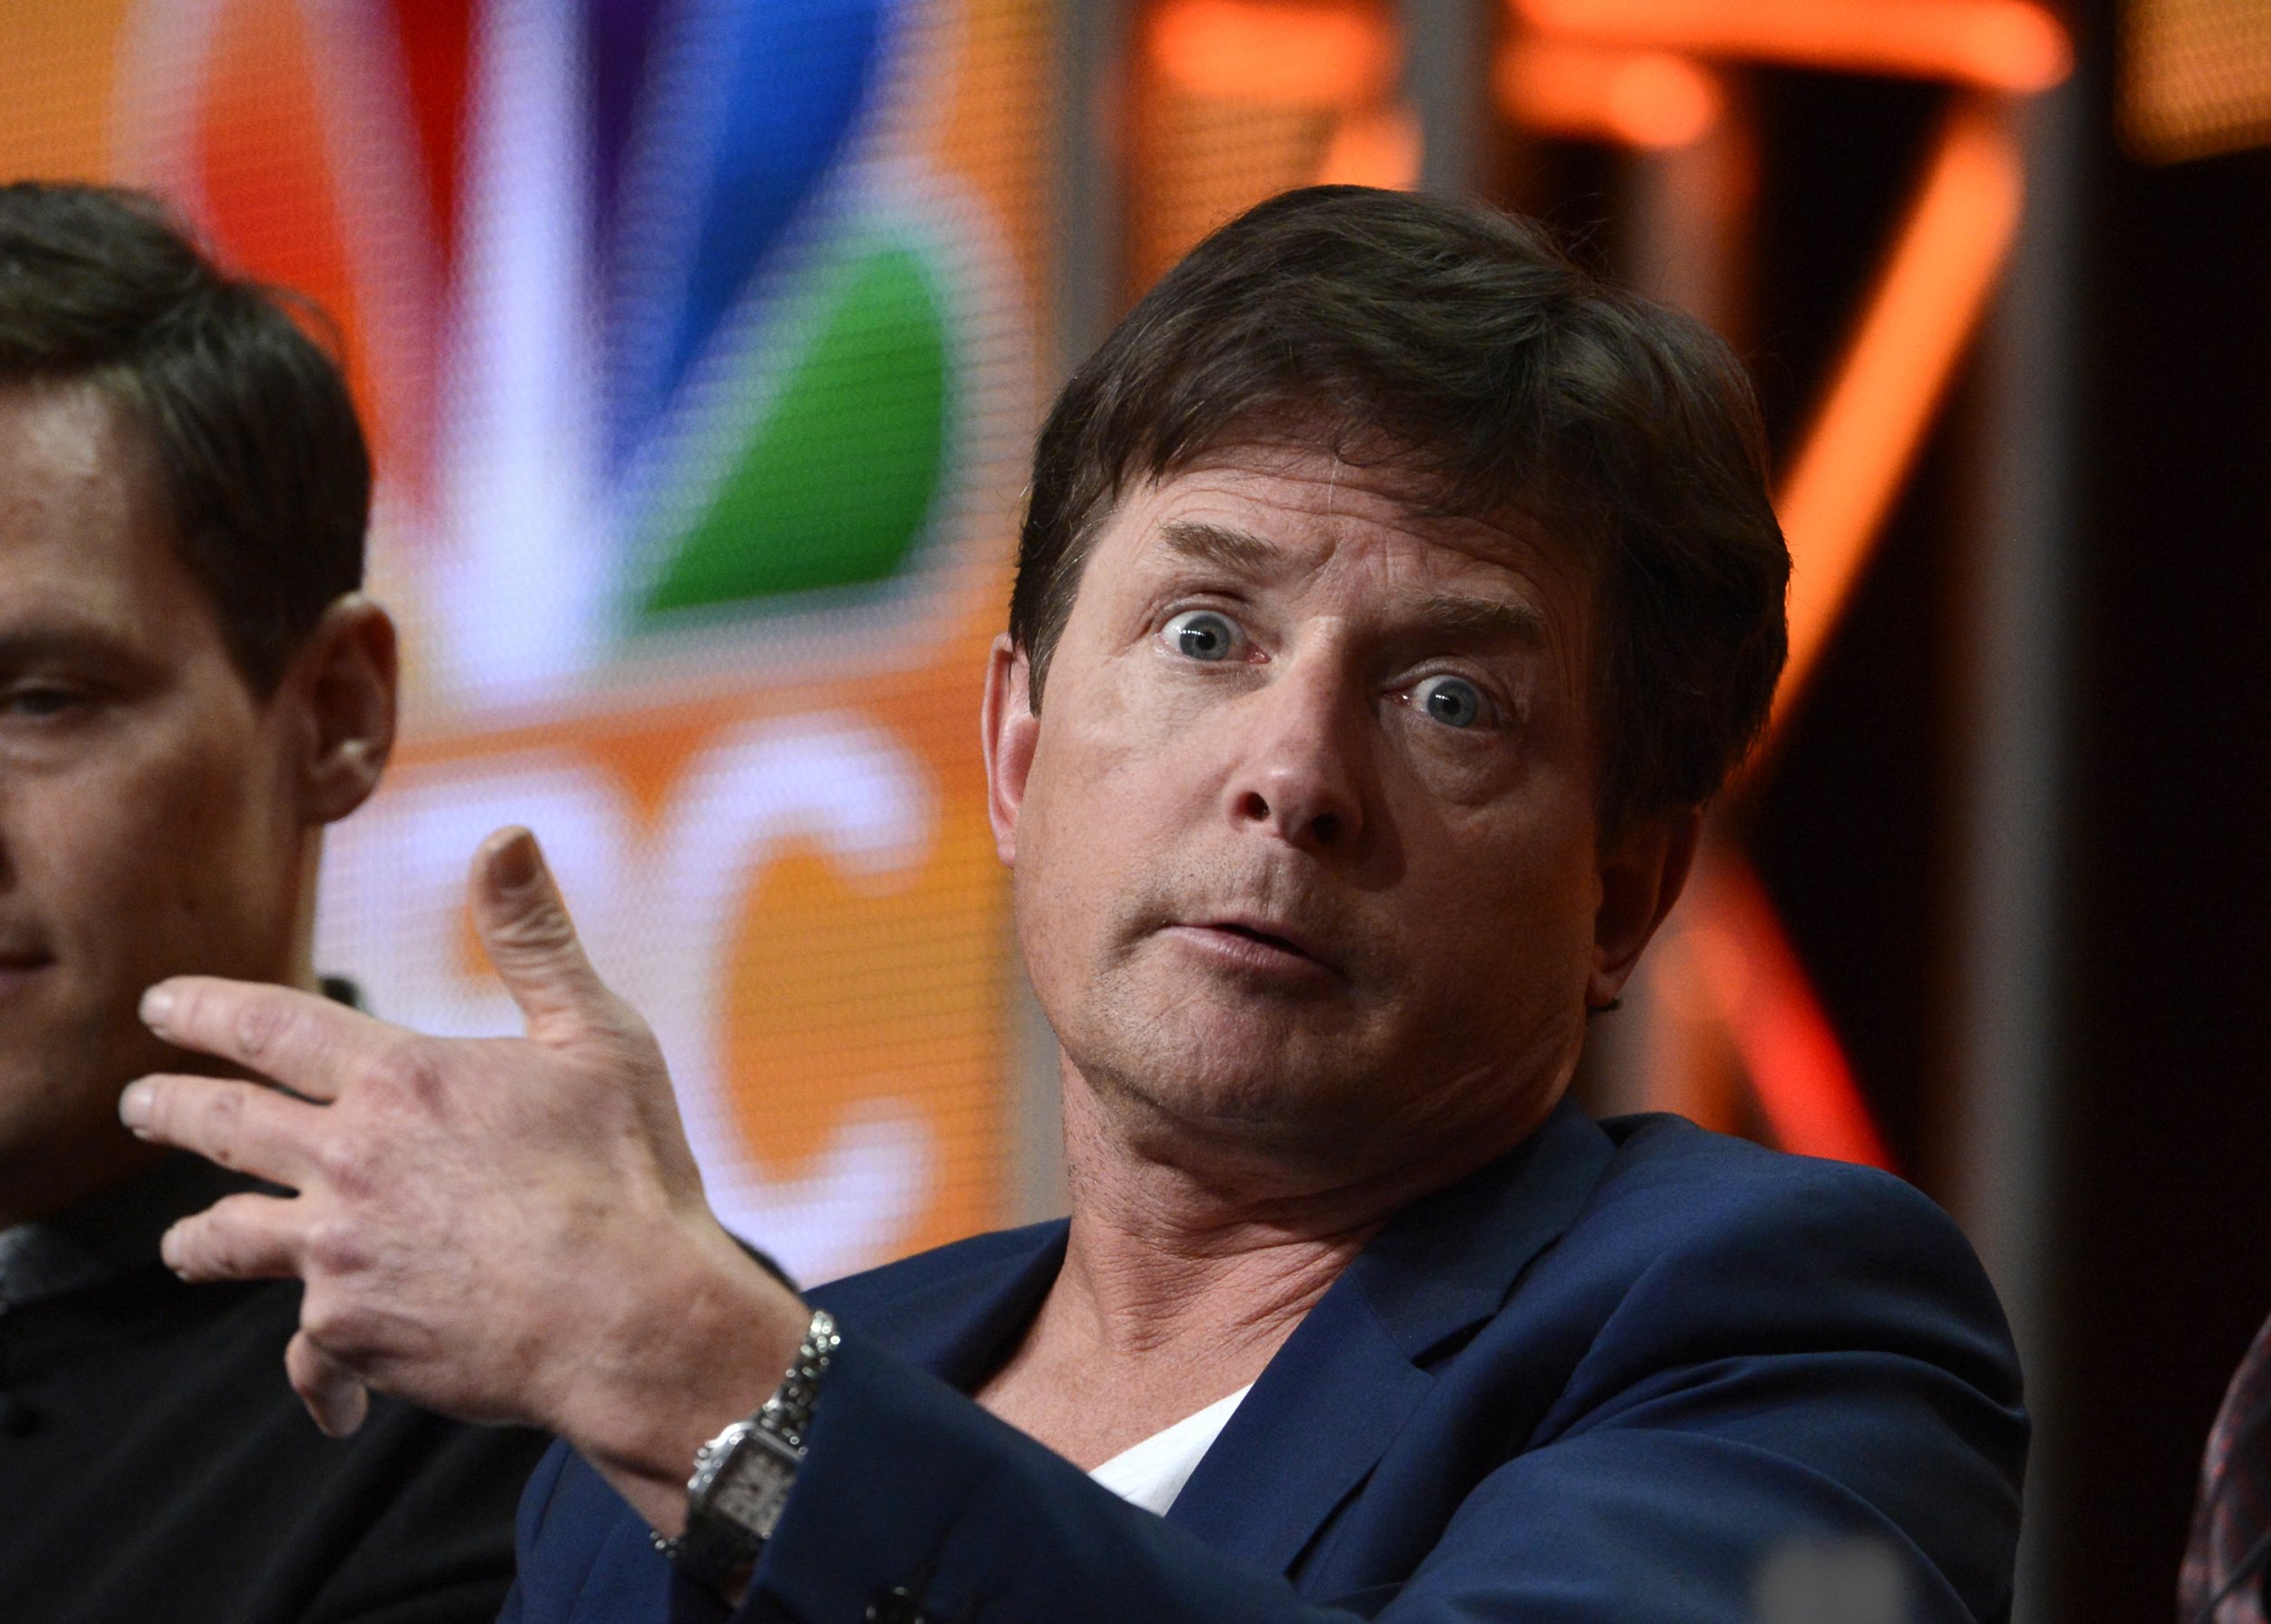 ‘The Michael J. Fox Show’ Pulled From NBC Lineup, Fox To Return